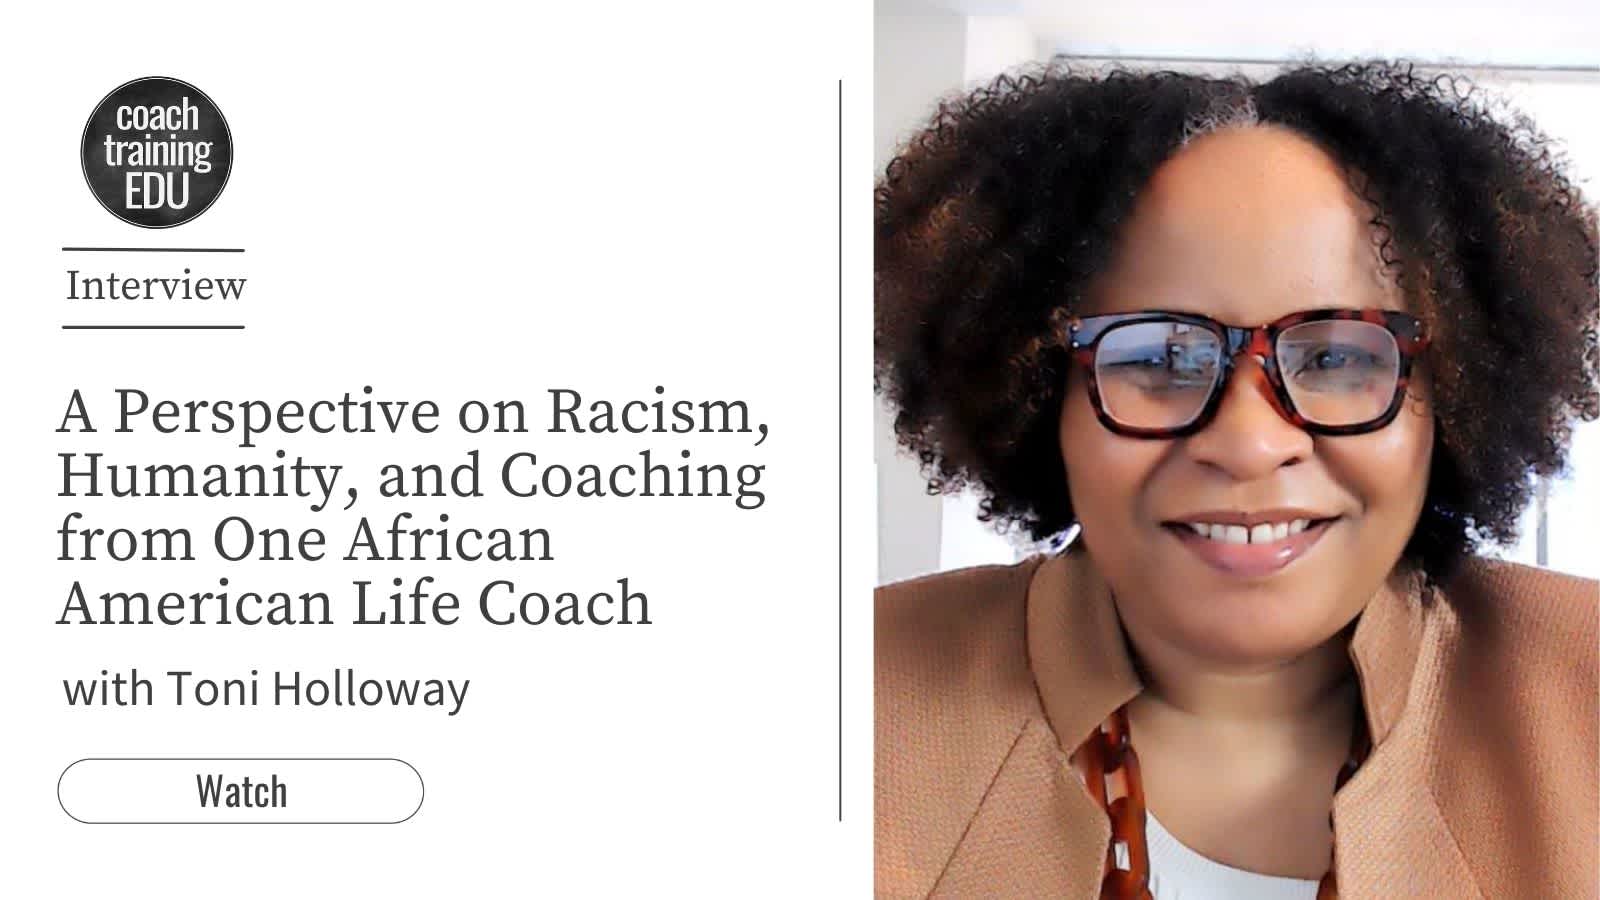 A Perspective on Racism, Humanity, and Coaching from One African American Life Coach